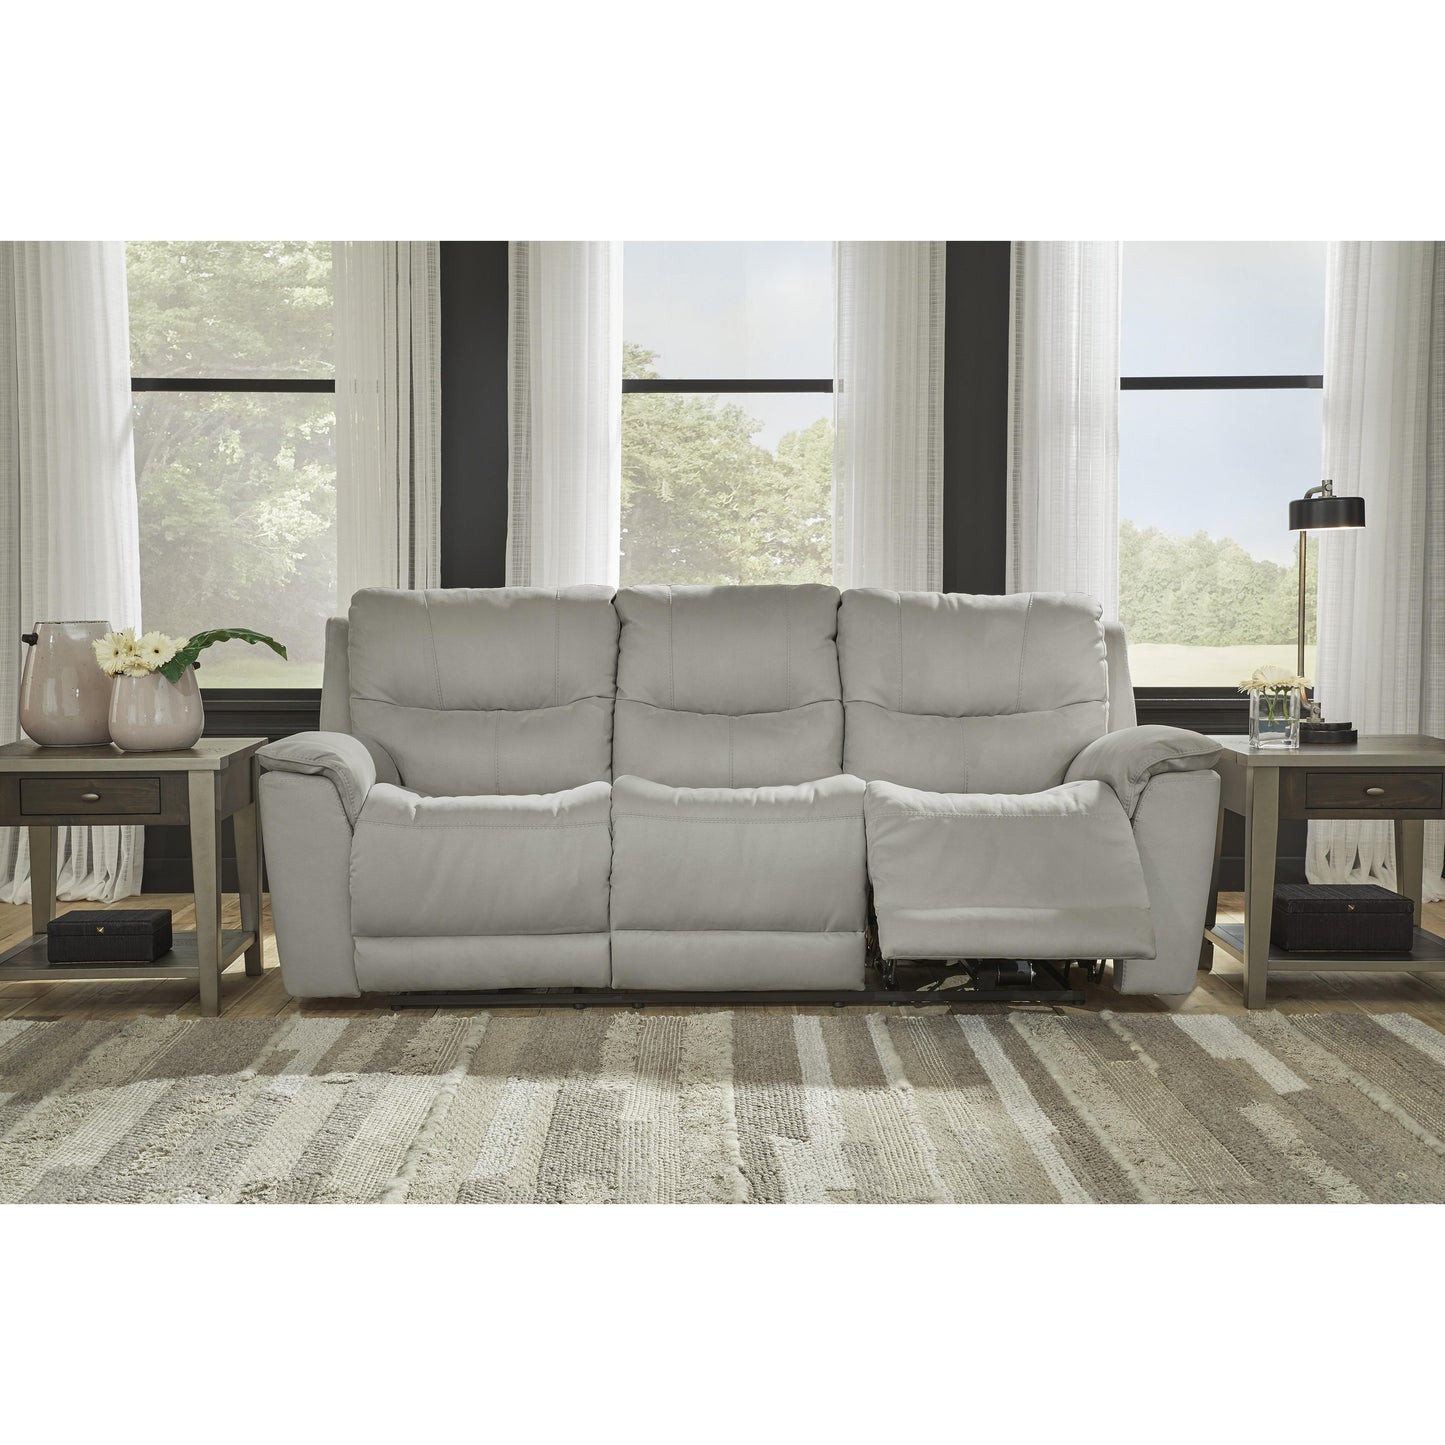 Signature Design by Ashley Next-Gen Gaucho Power Reclining Leather Look Sofa 6080615 IMAGE 5